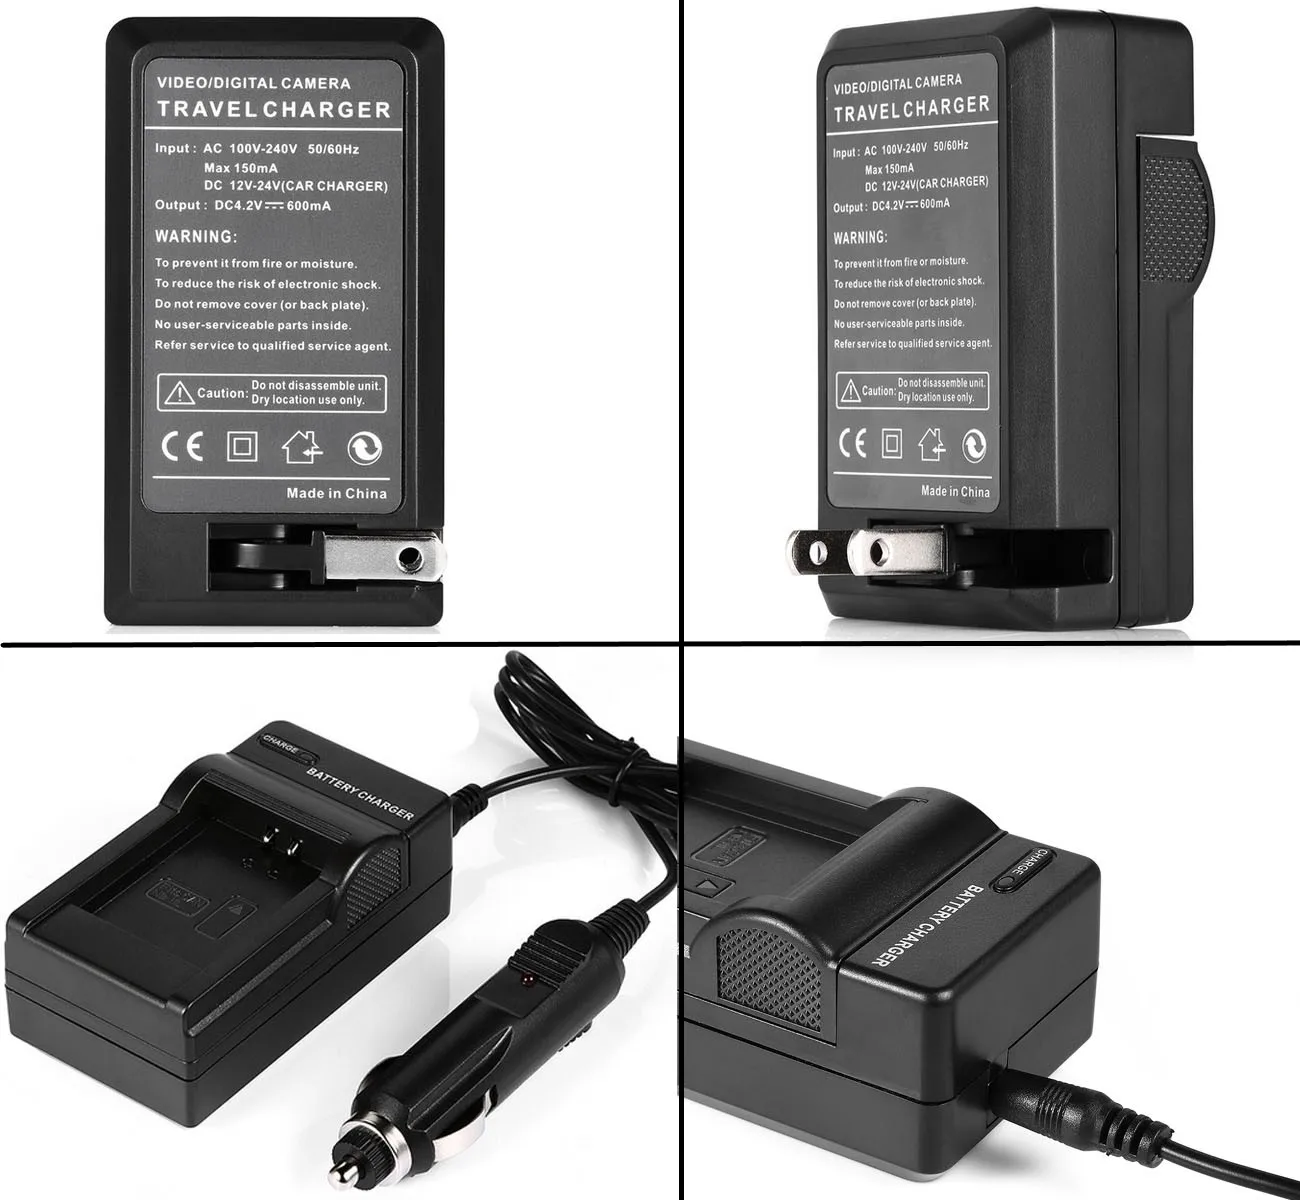 Battery Charger for Nikon Coolpix S3100, S3200, S3300, S3400, S3500, S3600,  S3700, S4100, S4150,S4200,S4300,S4400 Digital Camera